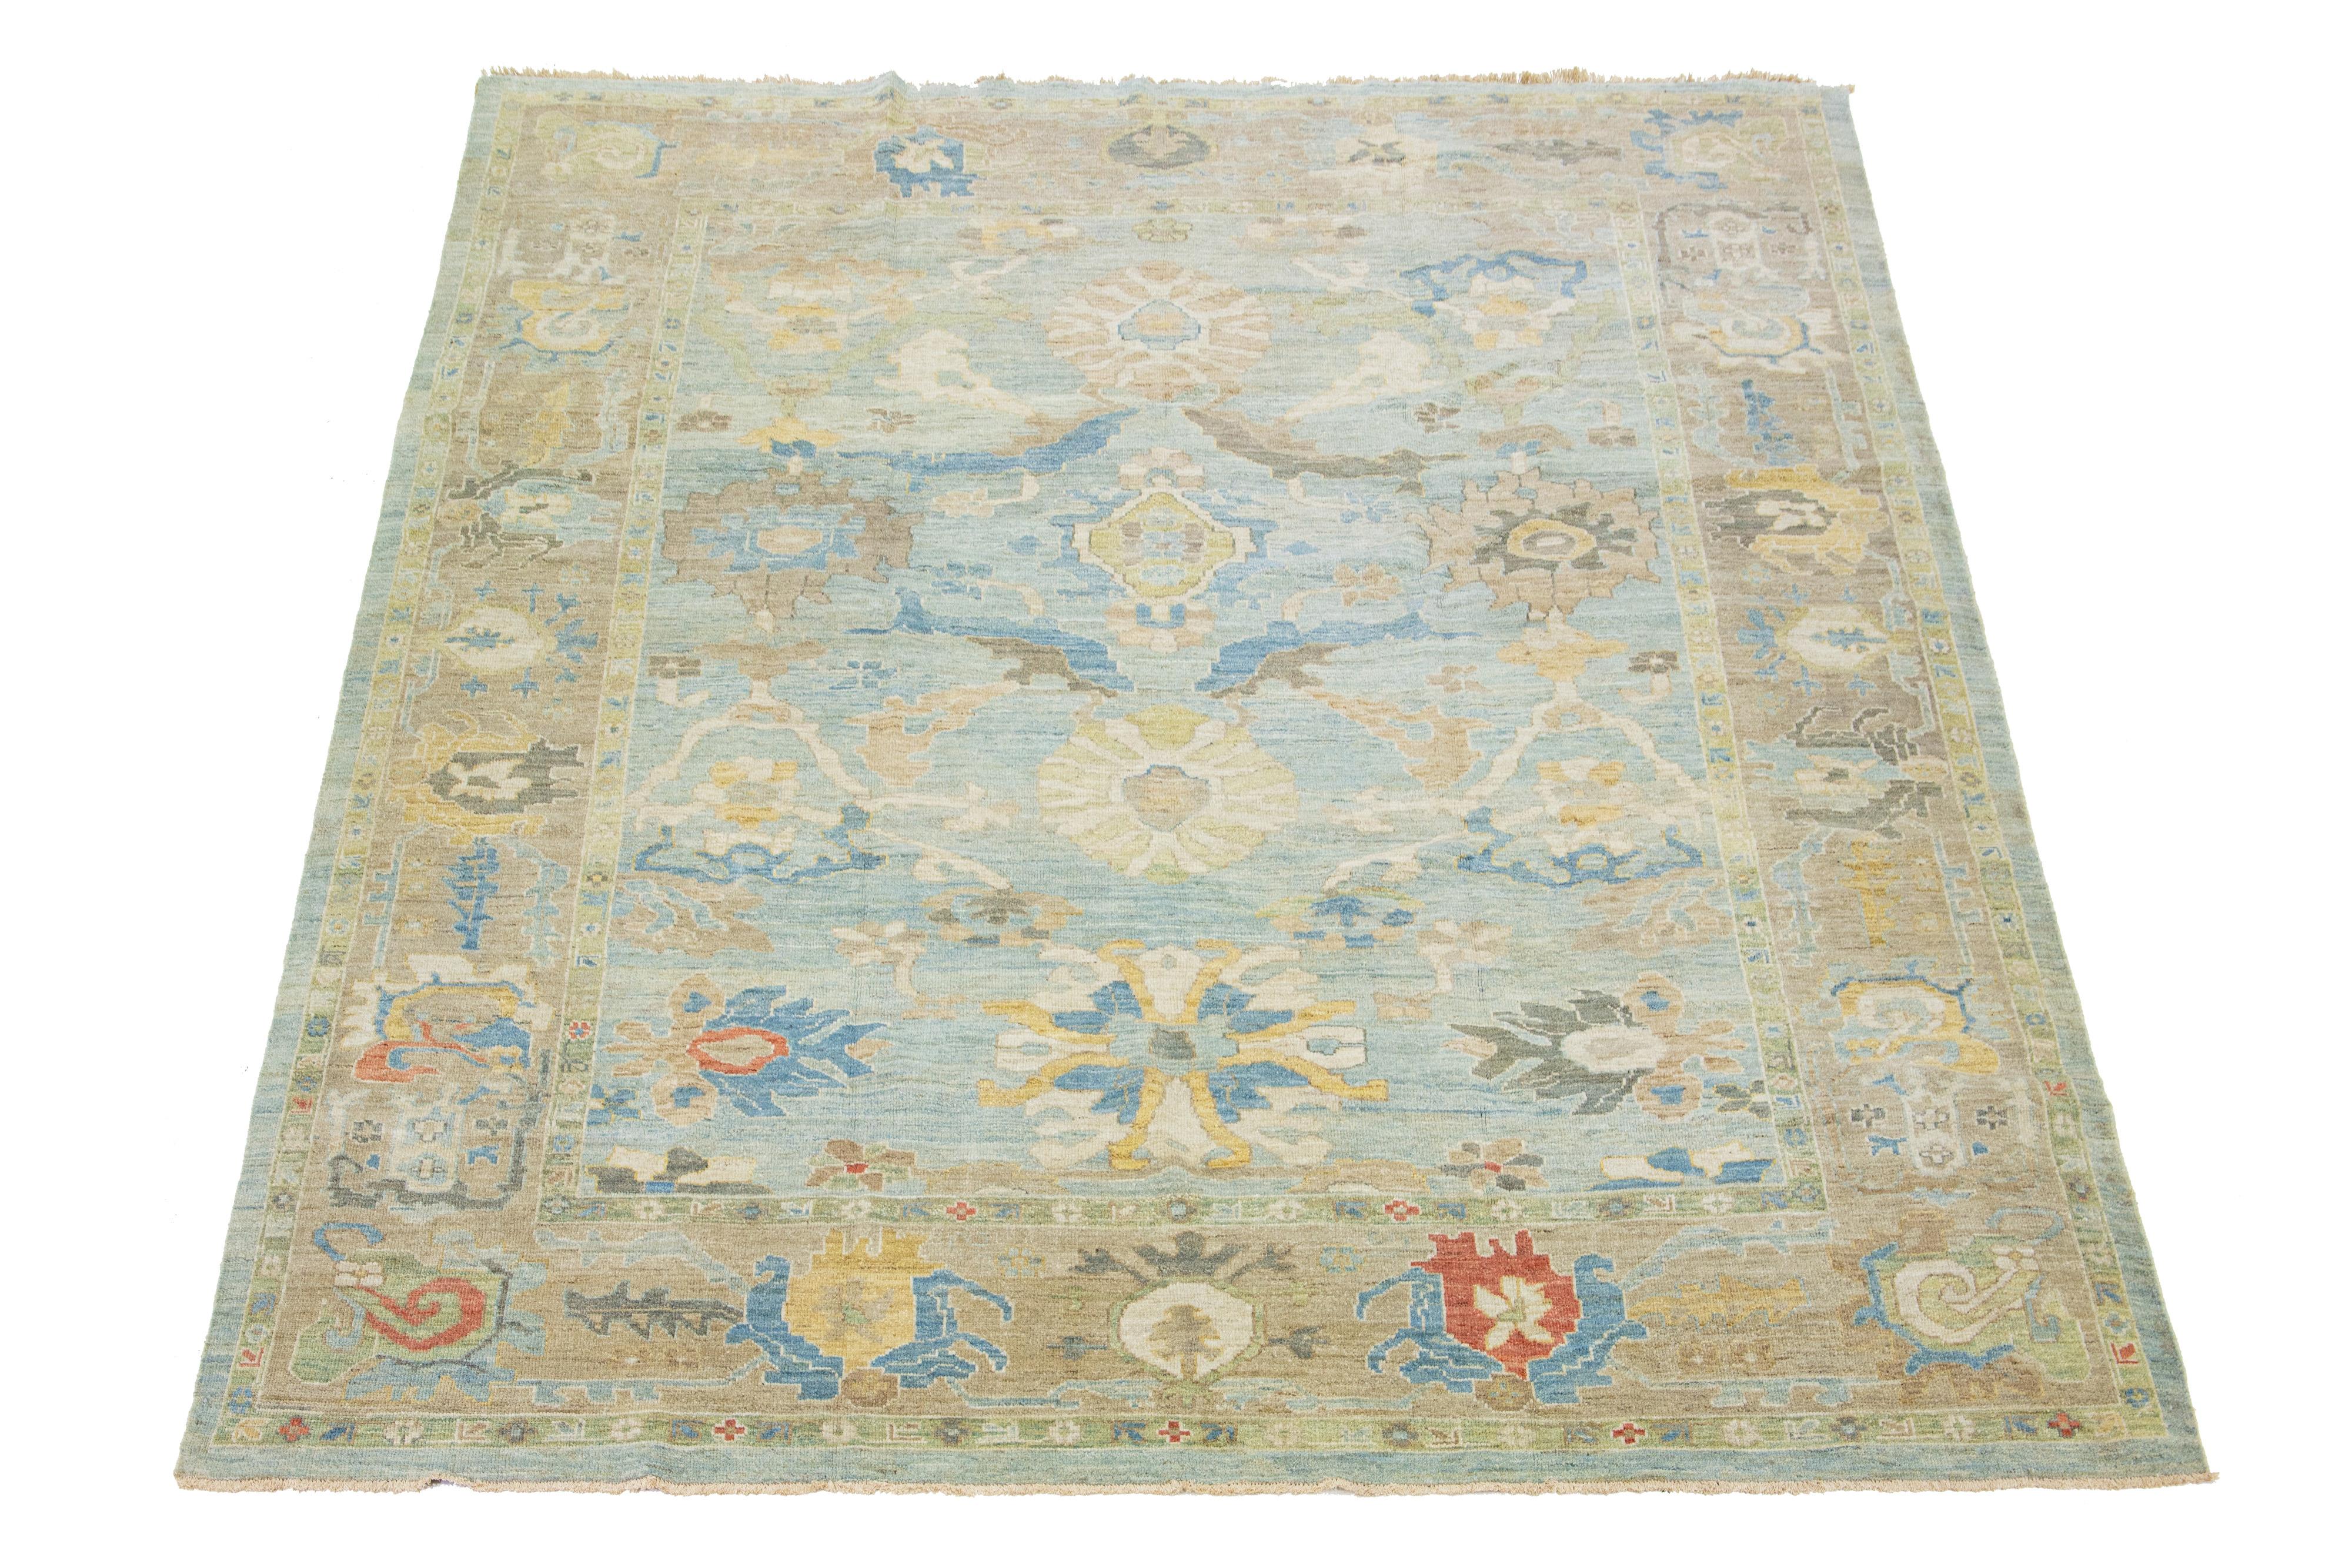 Beautiful modern Sultanabad hand-knotted wool rug with a blue field. This Sultanabad rug has beige and brown accents in a gorgeous all-over classic floral pattern design.

This rug measures 10'3